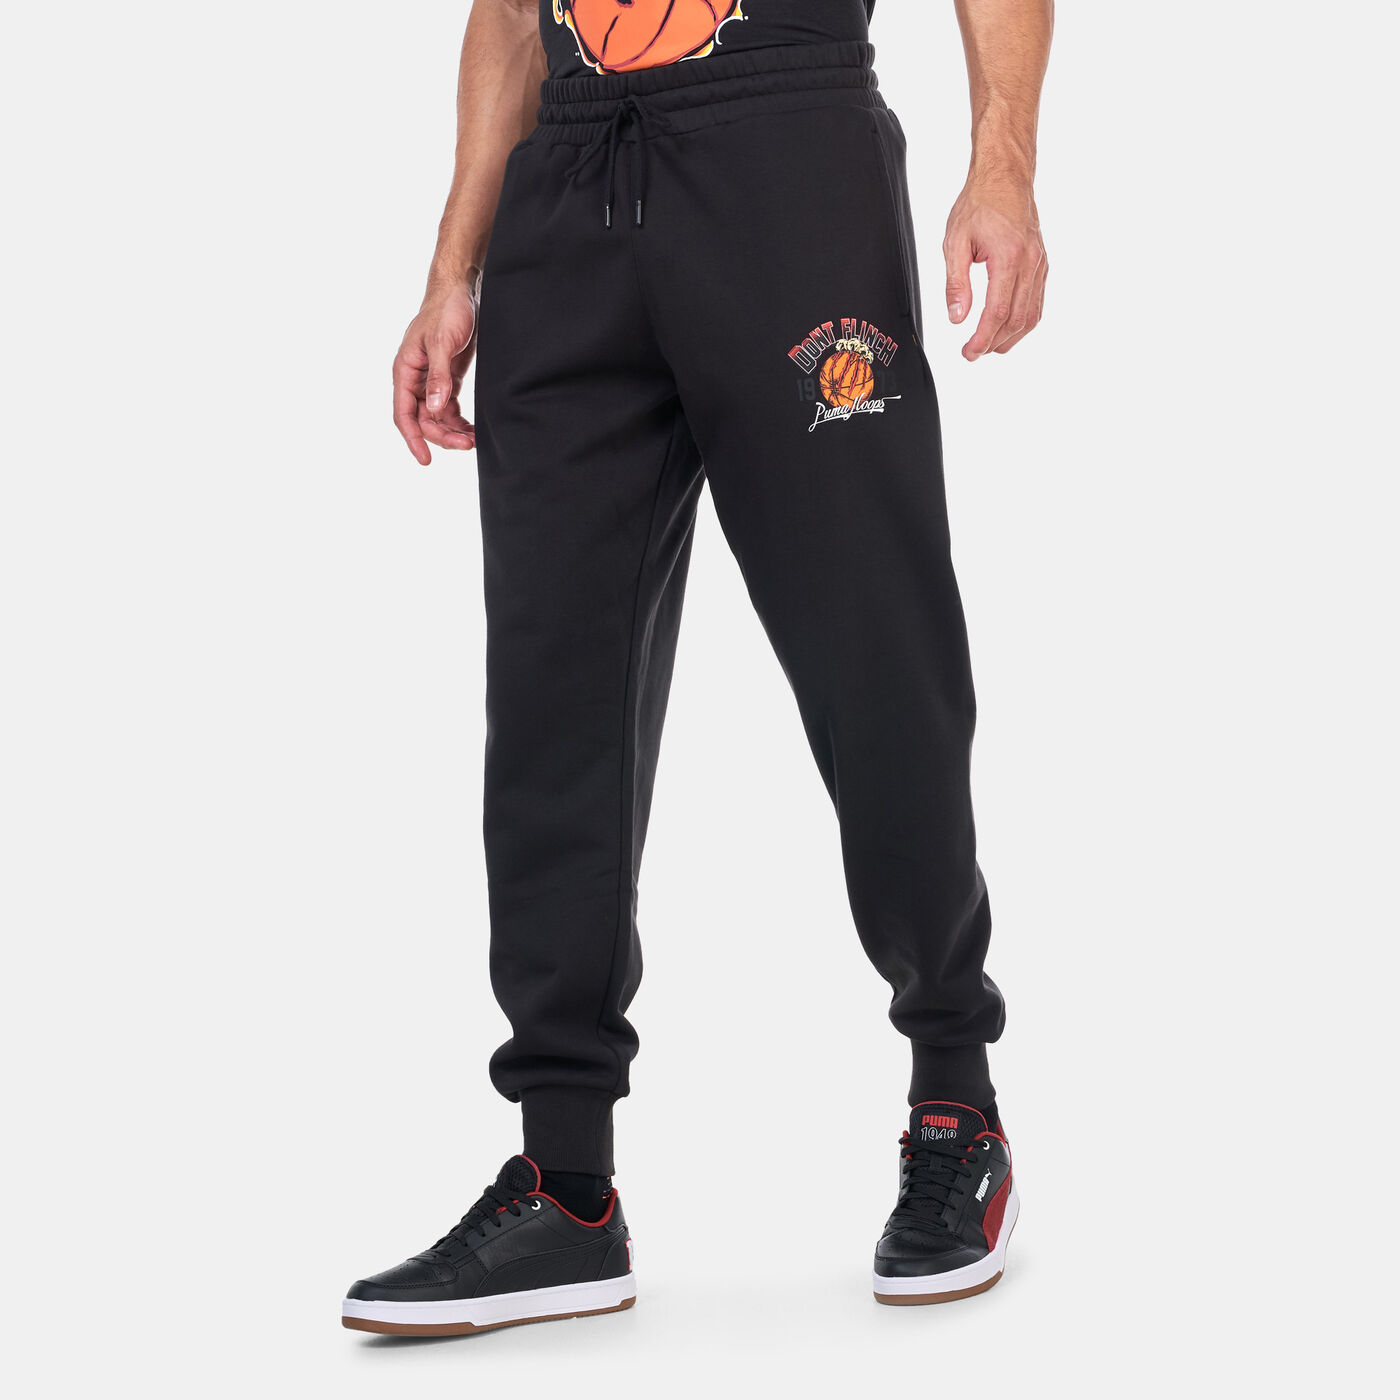 Men's Booster Basketball Graphic Sweatpants